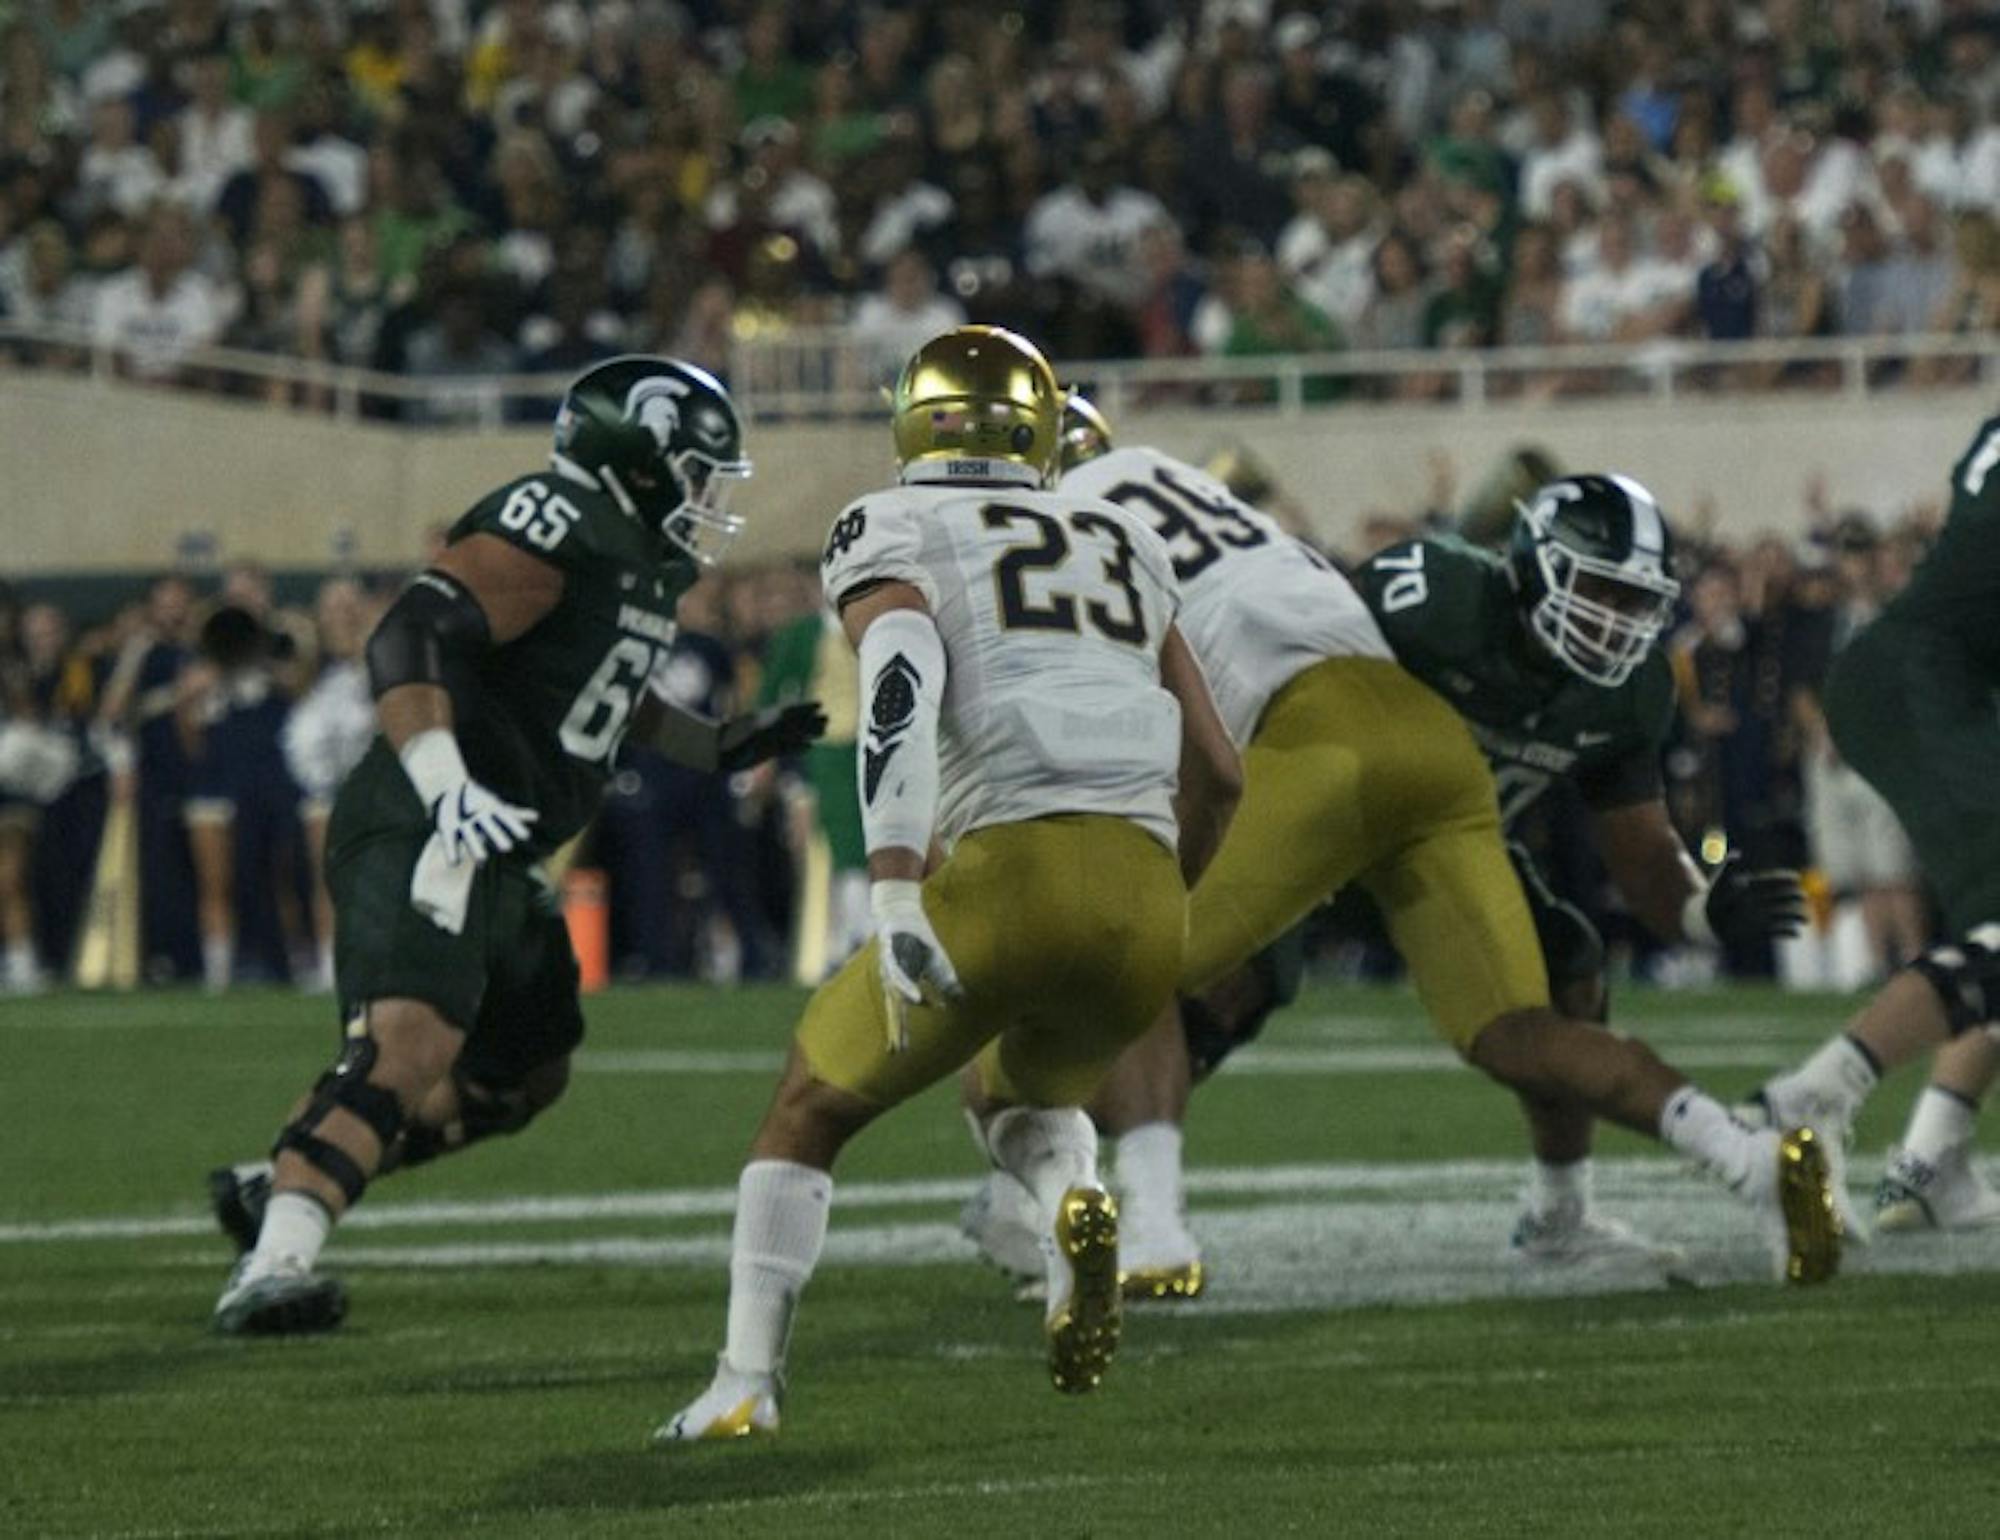 Irish senior linebacker Drue Tranquill reads the offense and looks to attack the line of scrimmage during Notre Dame’s 38-18 win over Michigan State on Saturday at Spartan Stadium.